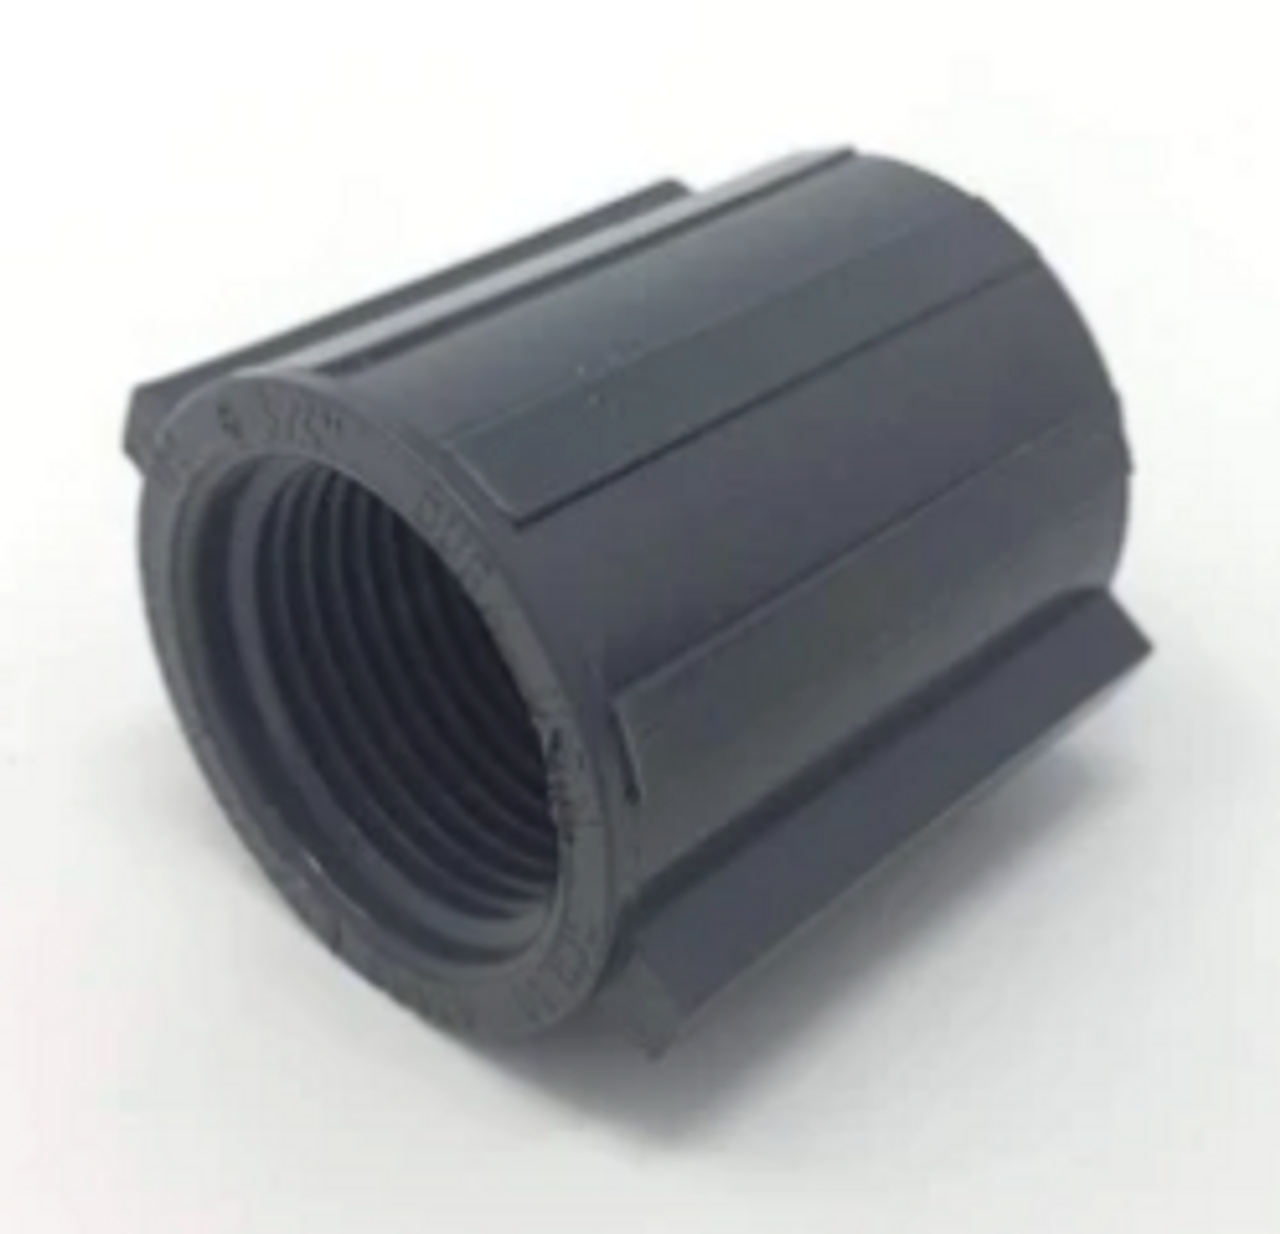 PVC Ruducer Threaded Coupler (FPT x FPT) SCH 40 or SCH 80